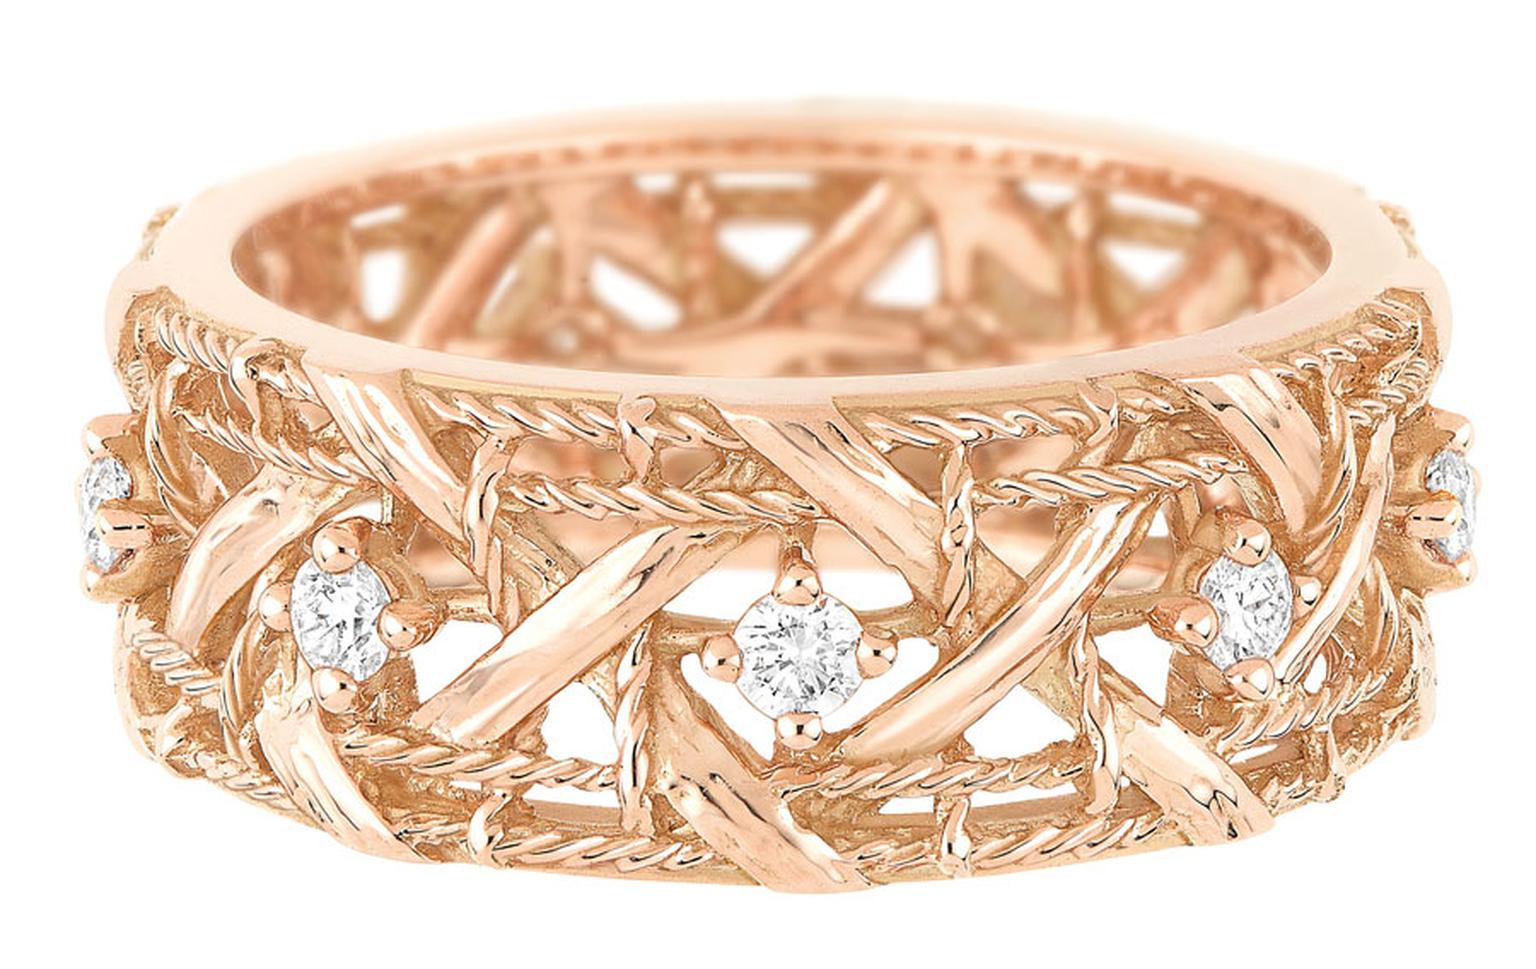 Dior-MY-DIOR-SM-RING-PINK-GOLD-AND-DIAMONDS.jpg